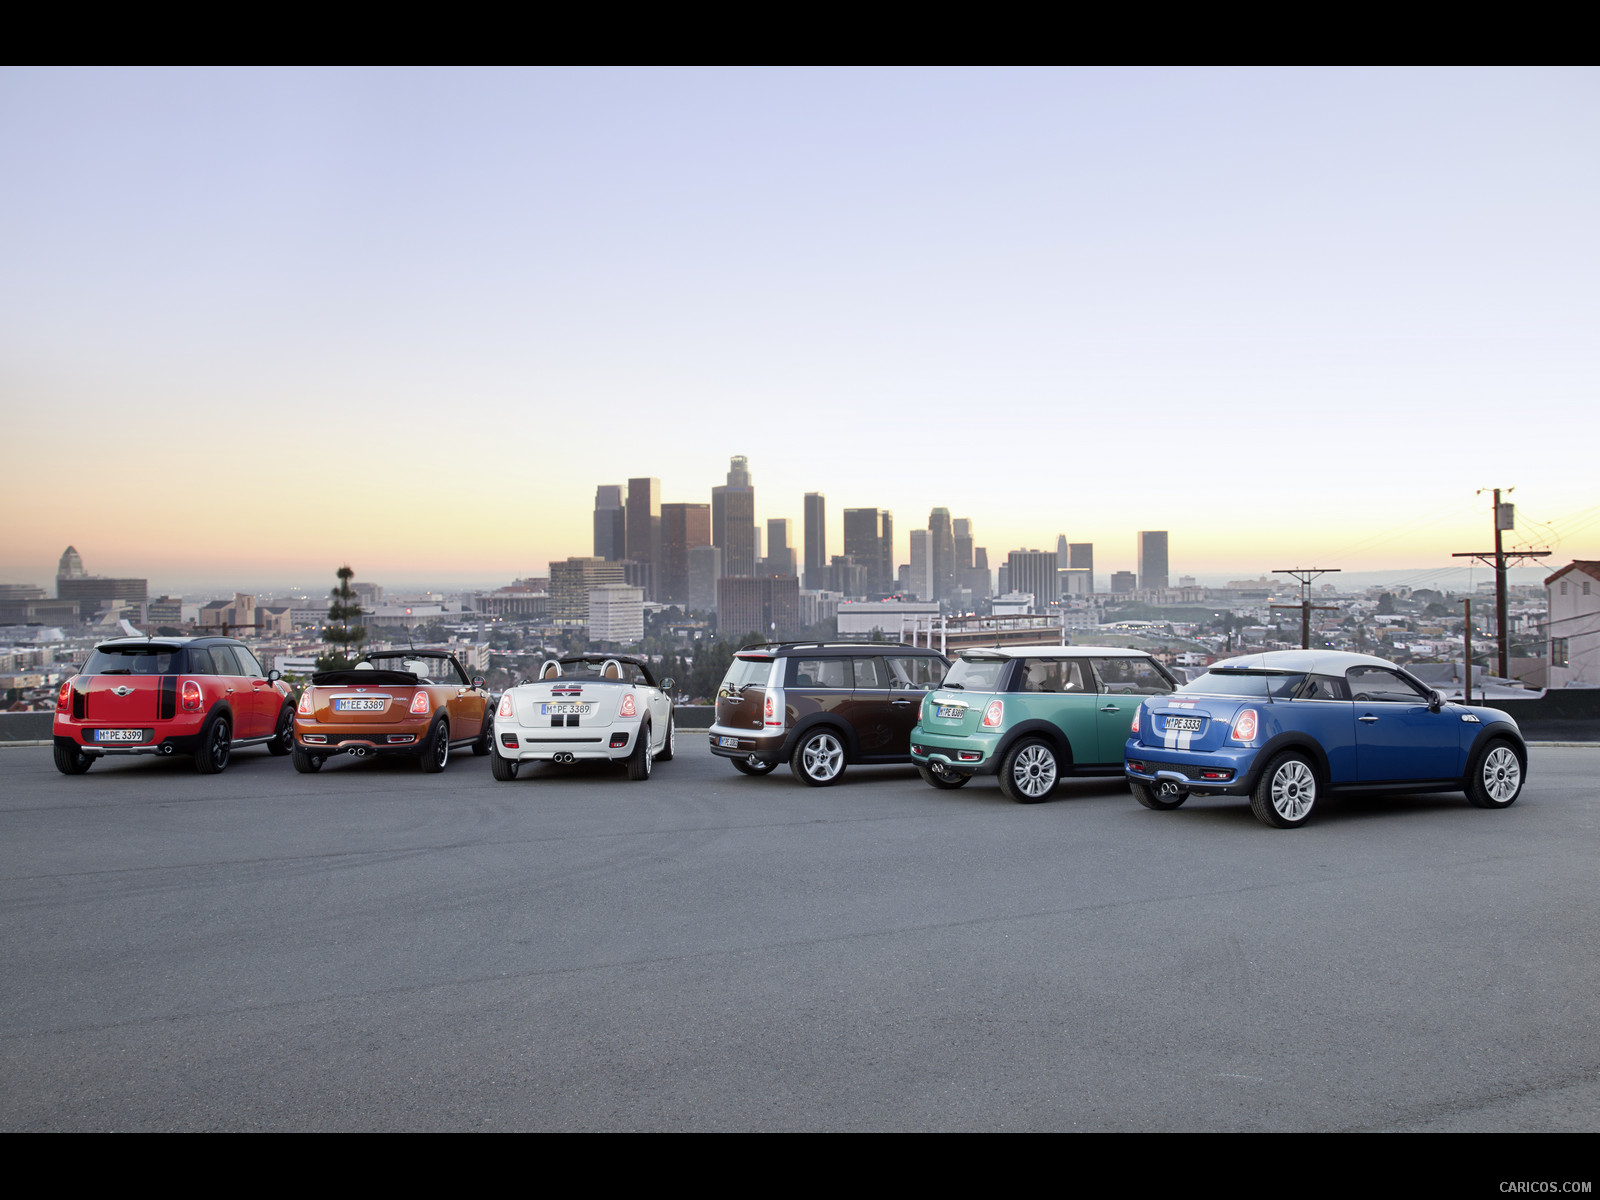 2012 MINI Roadster and family - , #208 of 389